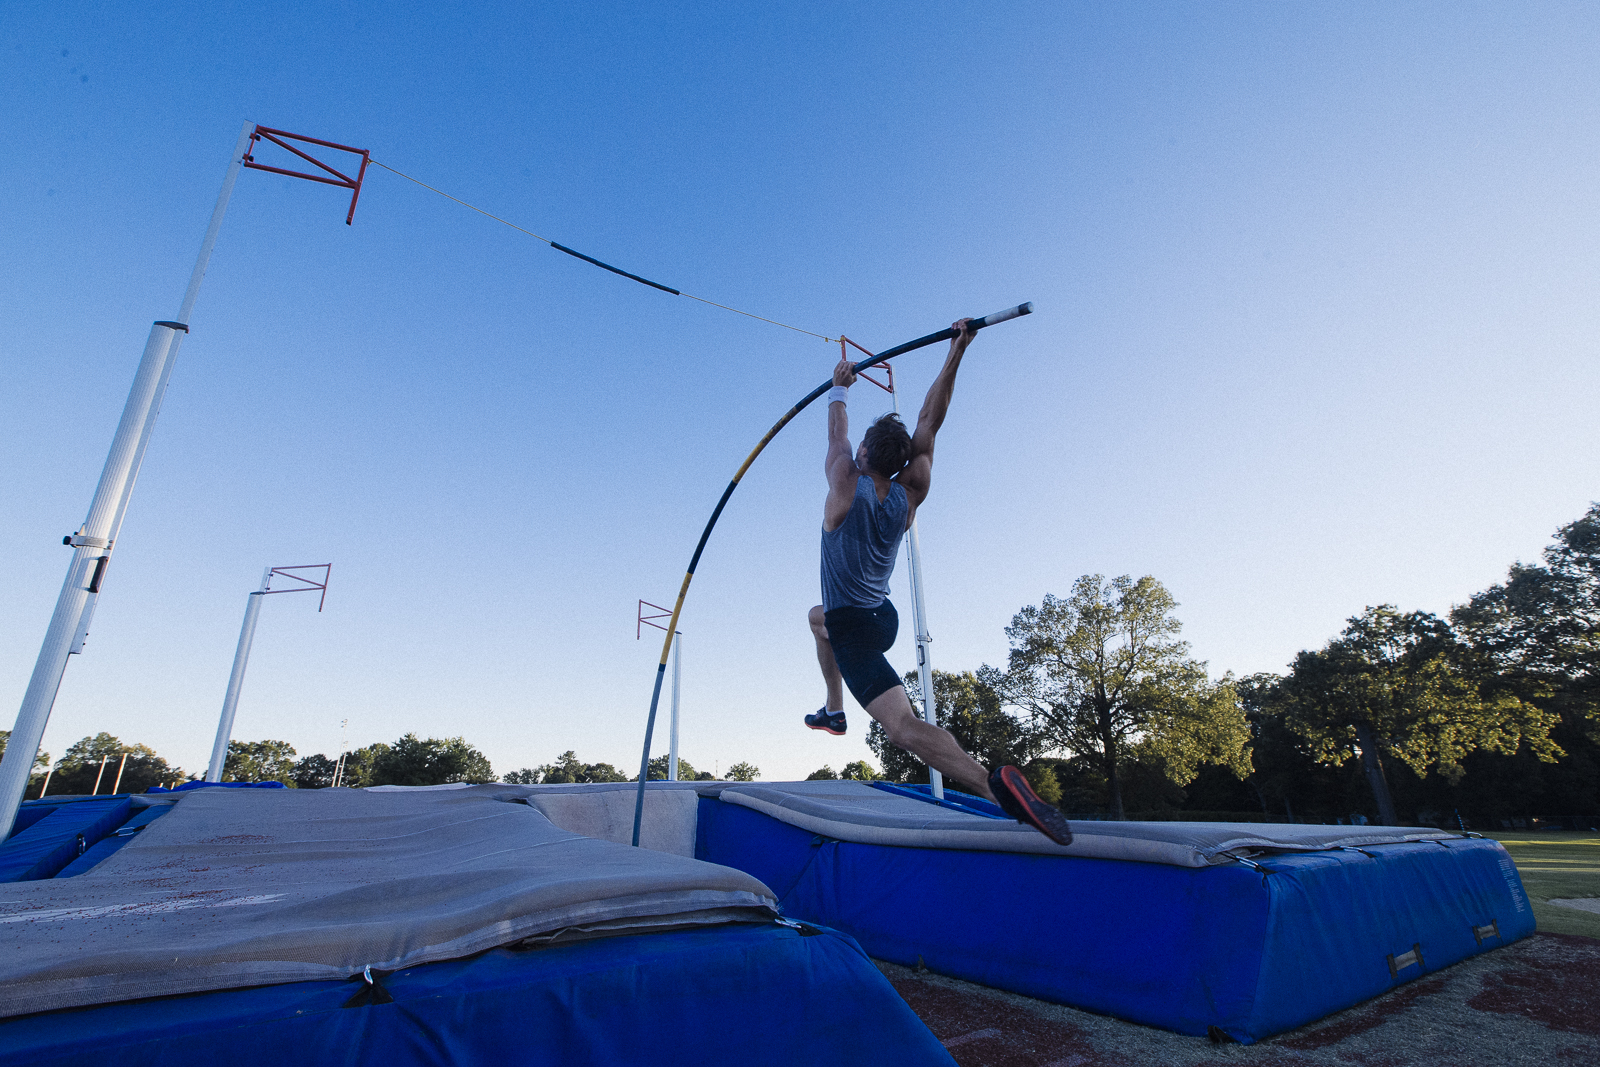  2016 Summer Pole Vaulting Olympiad Pauls Pujats at University of Memphis South Campus. “I think it would be nice if people could just constantly be proud of [the university],” said graduate student Lucas Skinner. (Ziggy Mack)